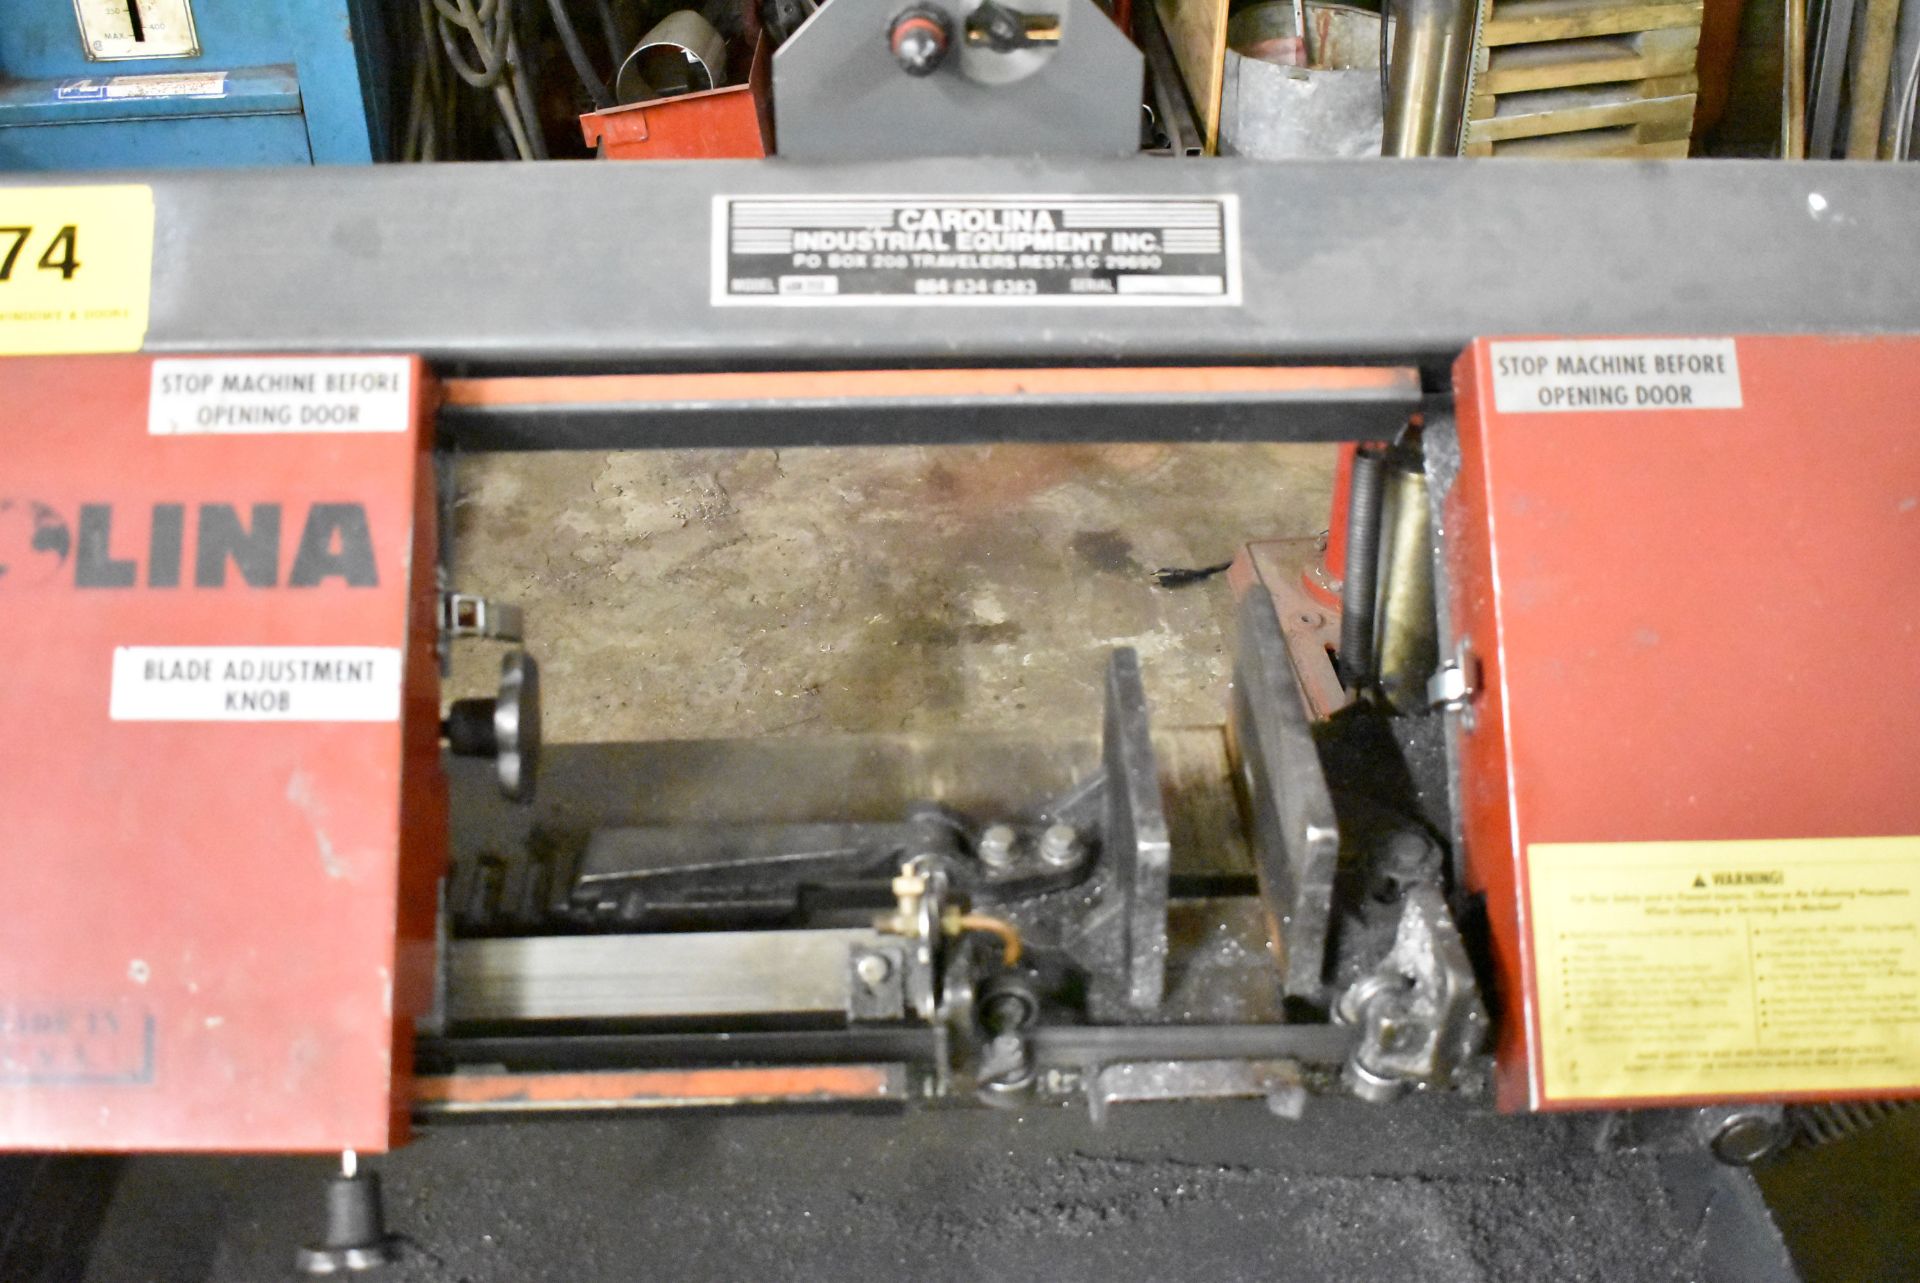 CAROLINA LCD 712 HORIZONTAL BAND SAW, S/N 3946 (LOCATED AT 1636 CHARLES ST, WHITBY, ON L1N 1B9) - Image 2 of 3